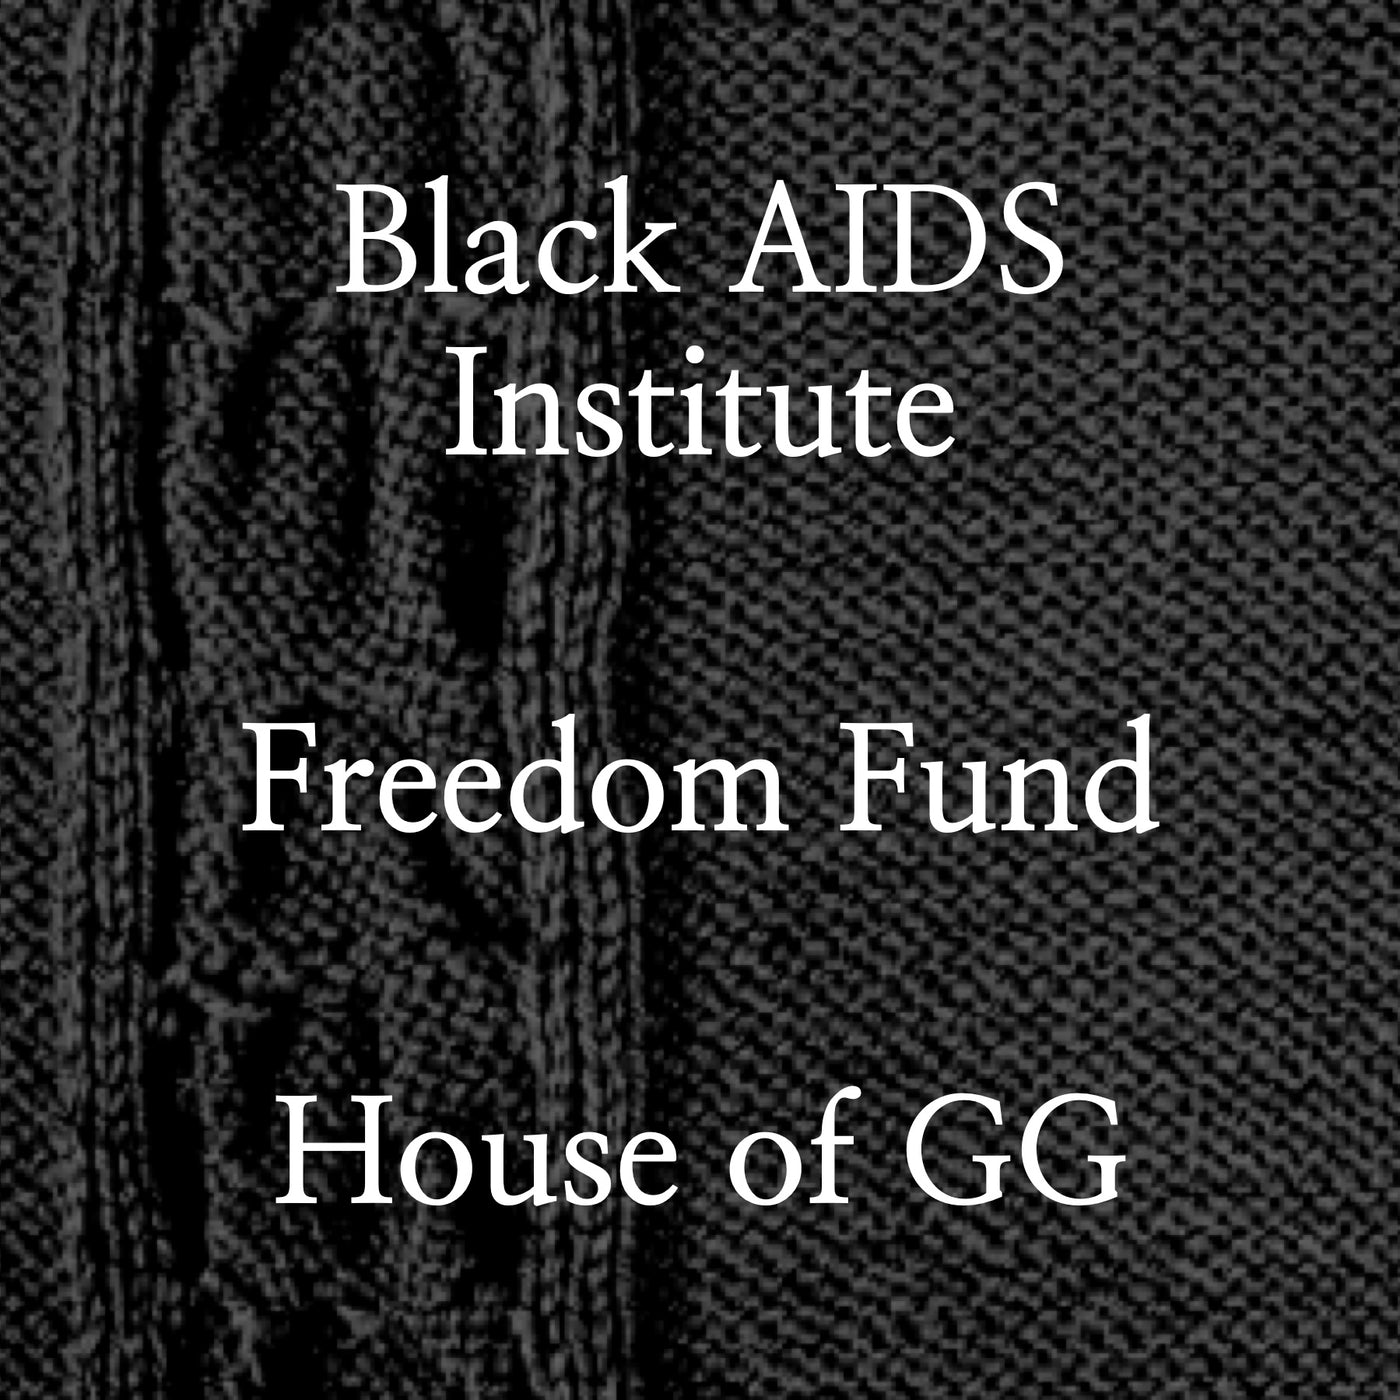 black aids institute freedom fund house of gg